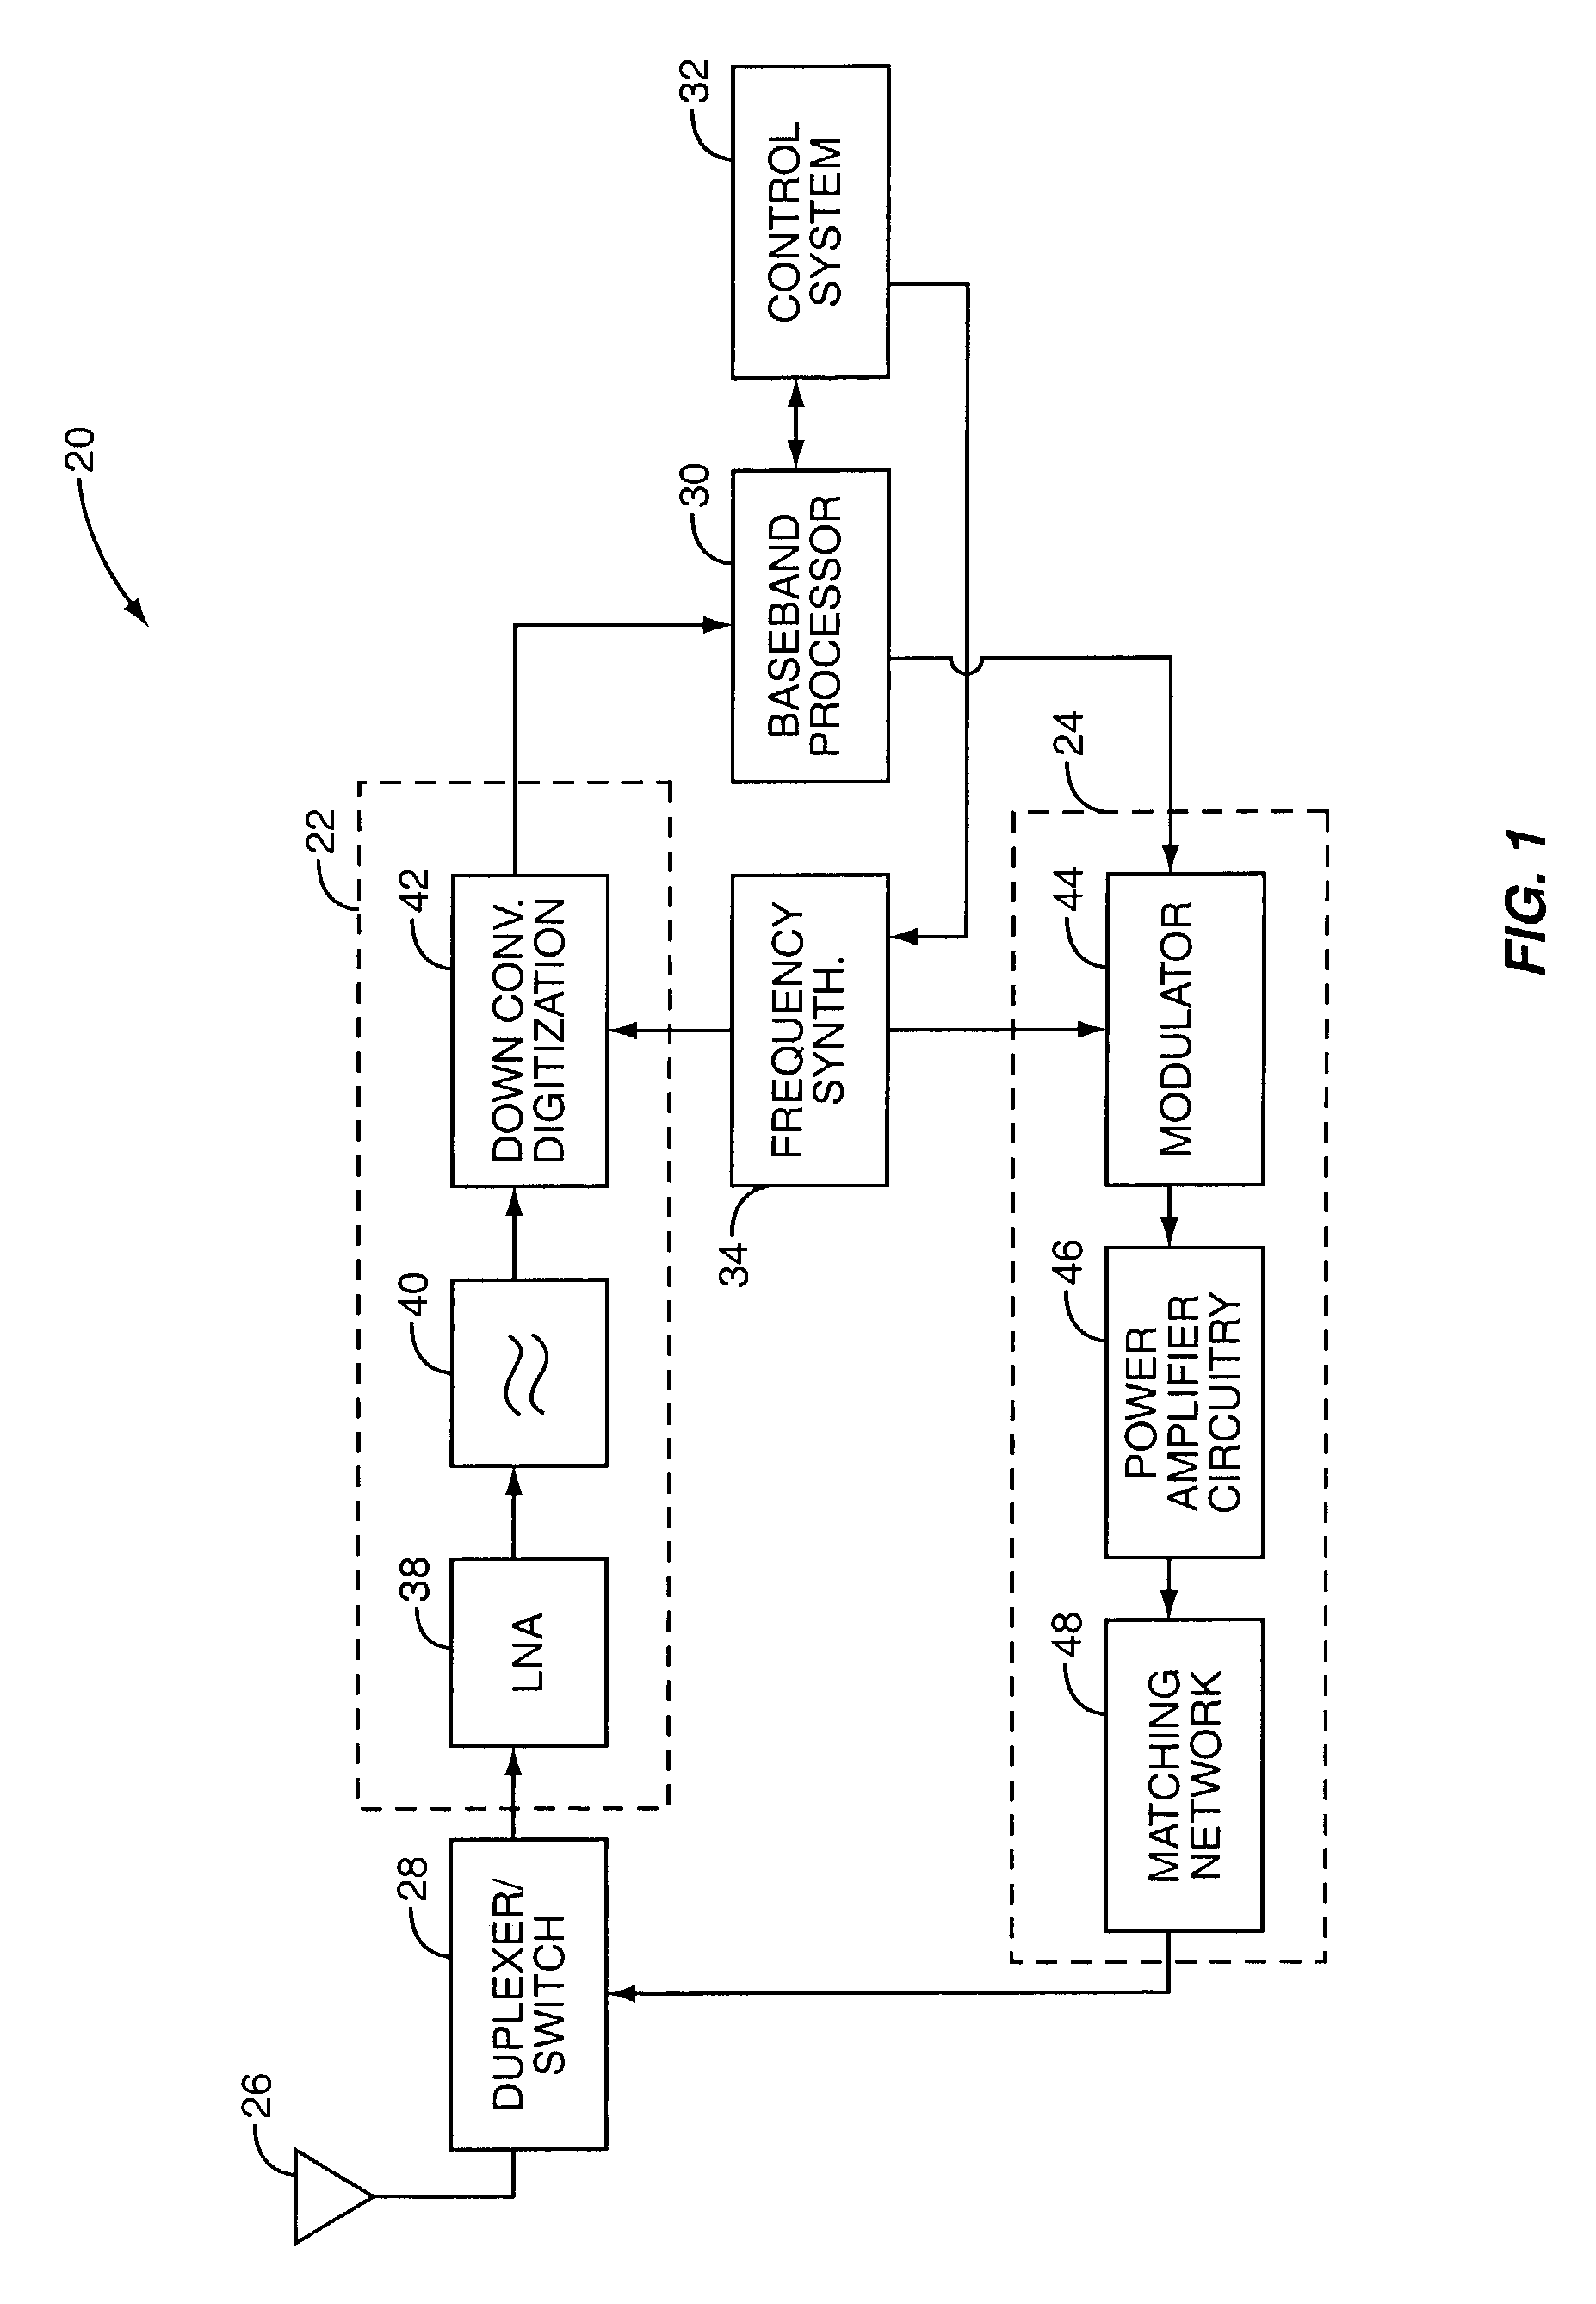 Low complexity interference cancellation